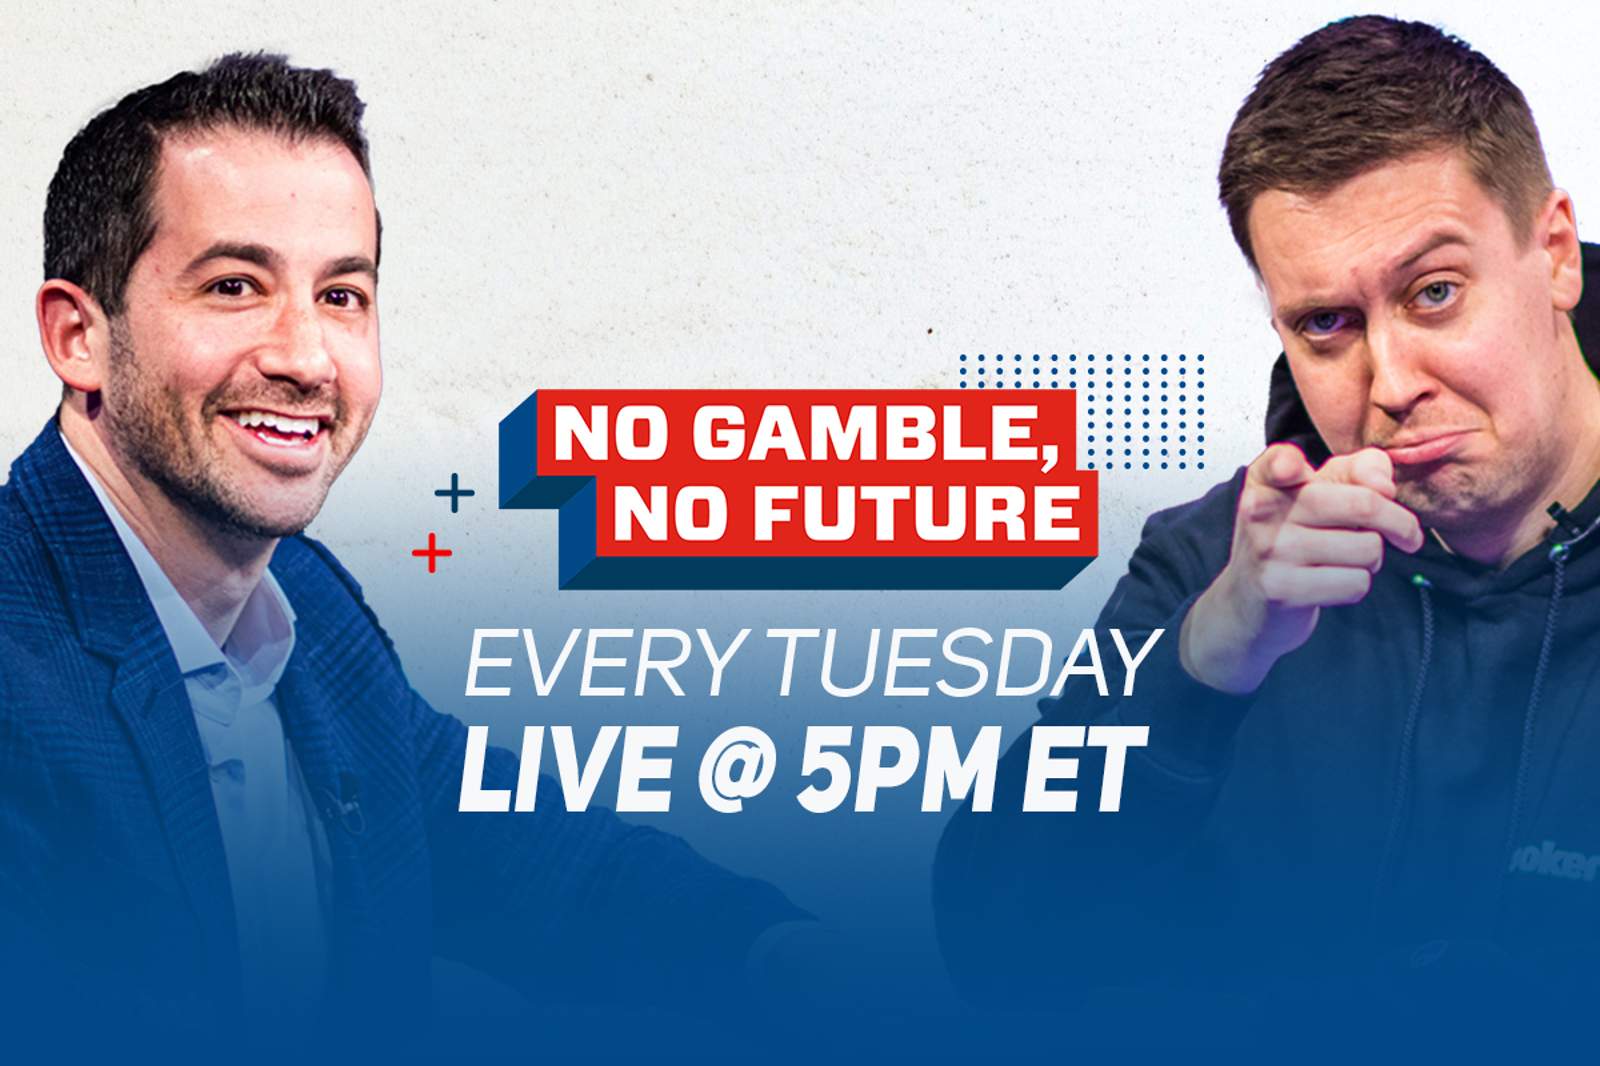 No Gamble, No Future Episode 13 on Today at 5 p.m. ET with Joey Ingram